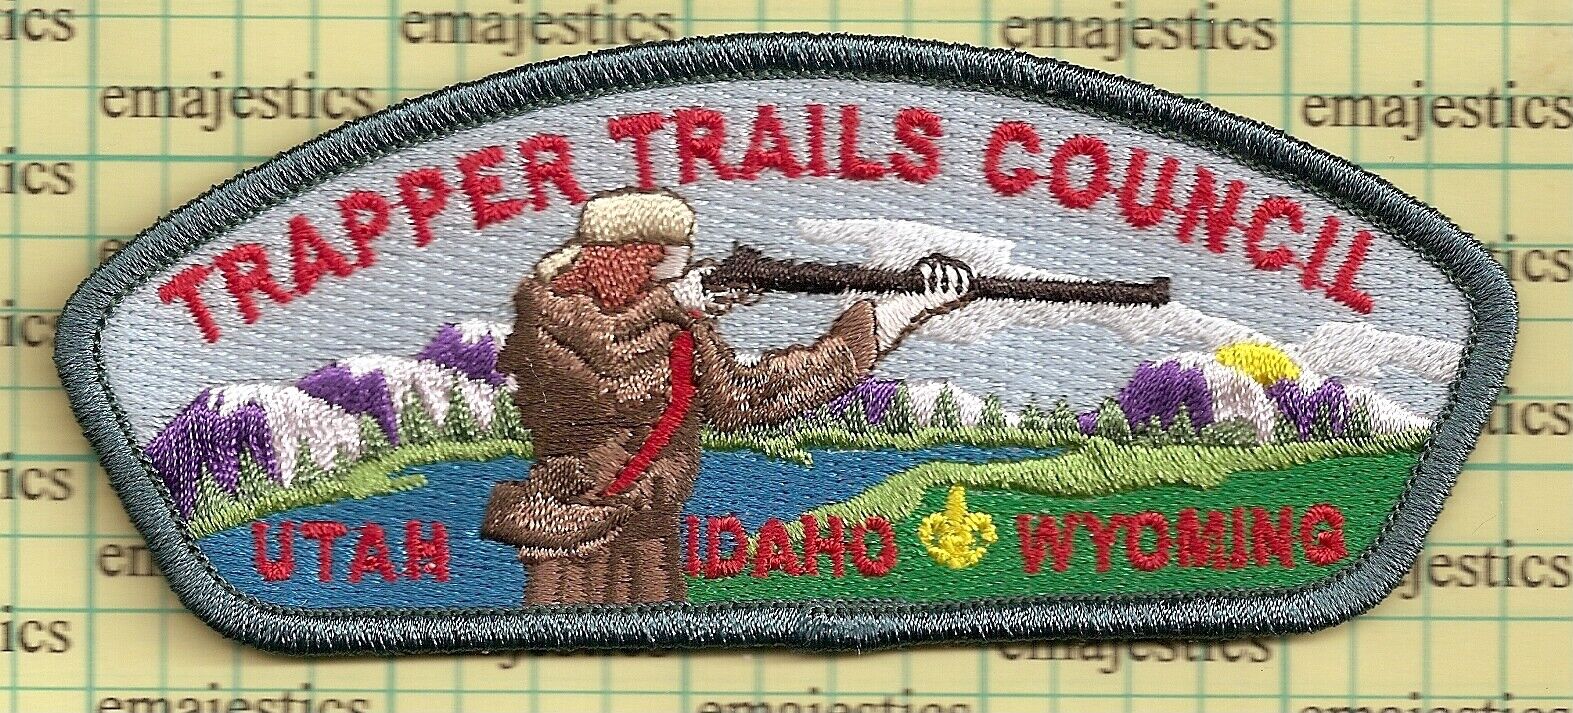 BSA CSP TRAPPER TRAILS COUNCIL MERGED ISSUE S-7 WITH 1910 BACKING